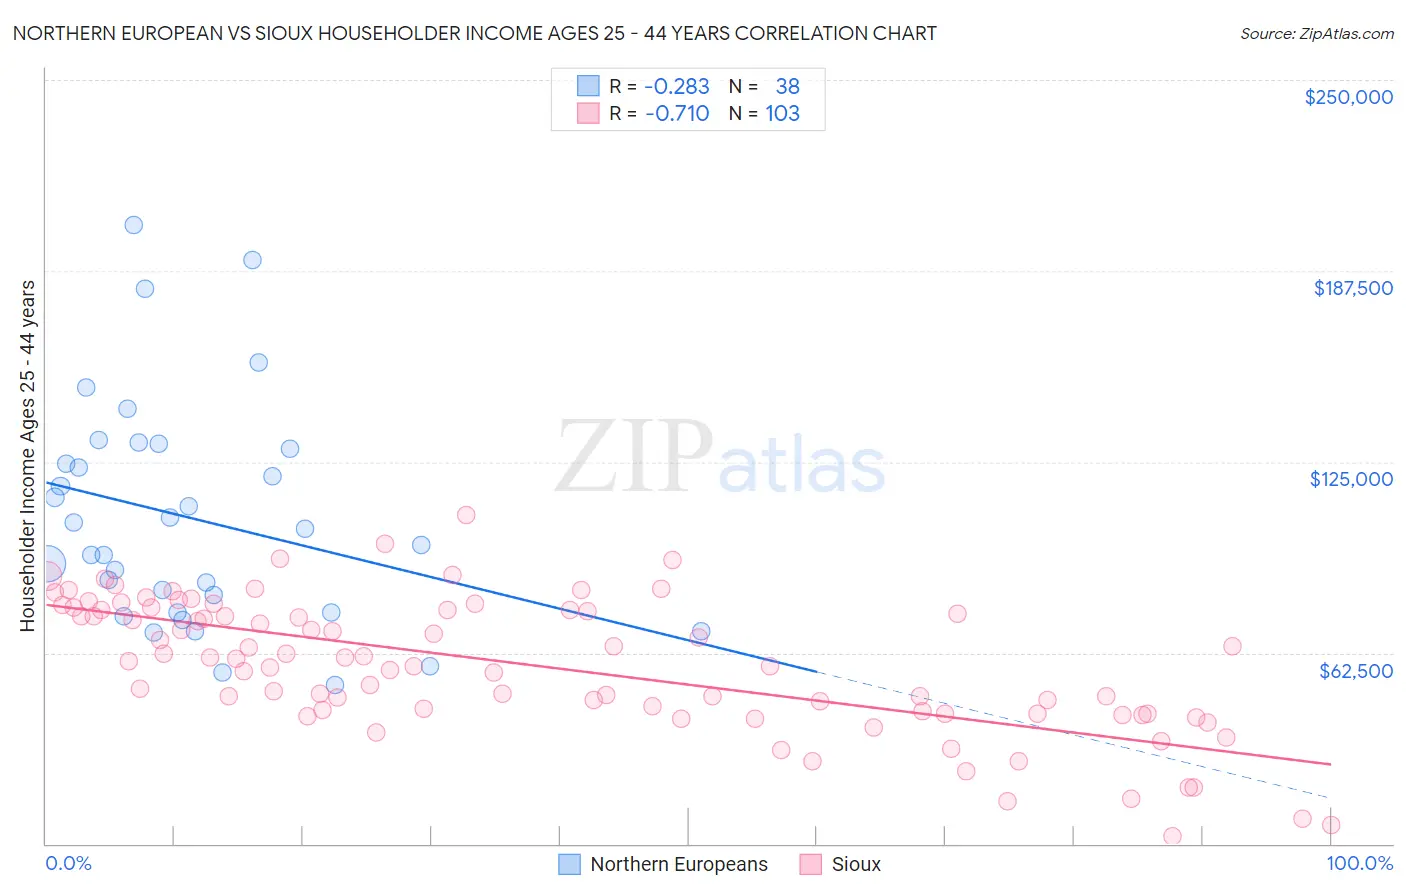 Northern European vs Sioux Householder Income Ages 25 - 44 years